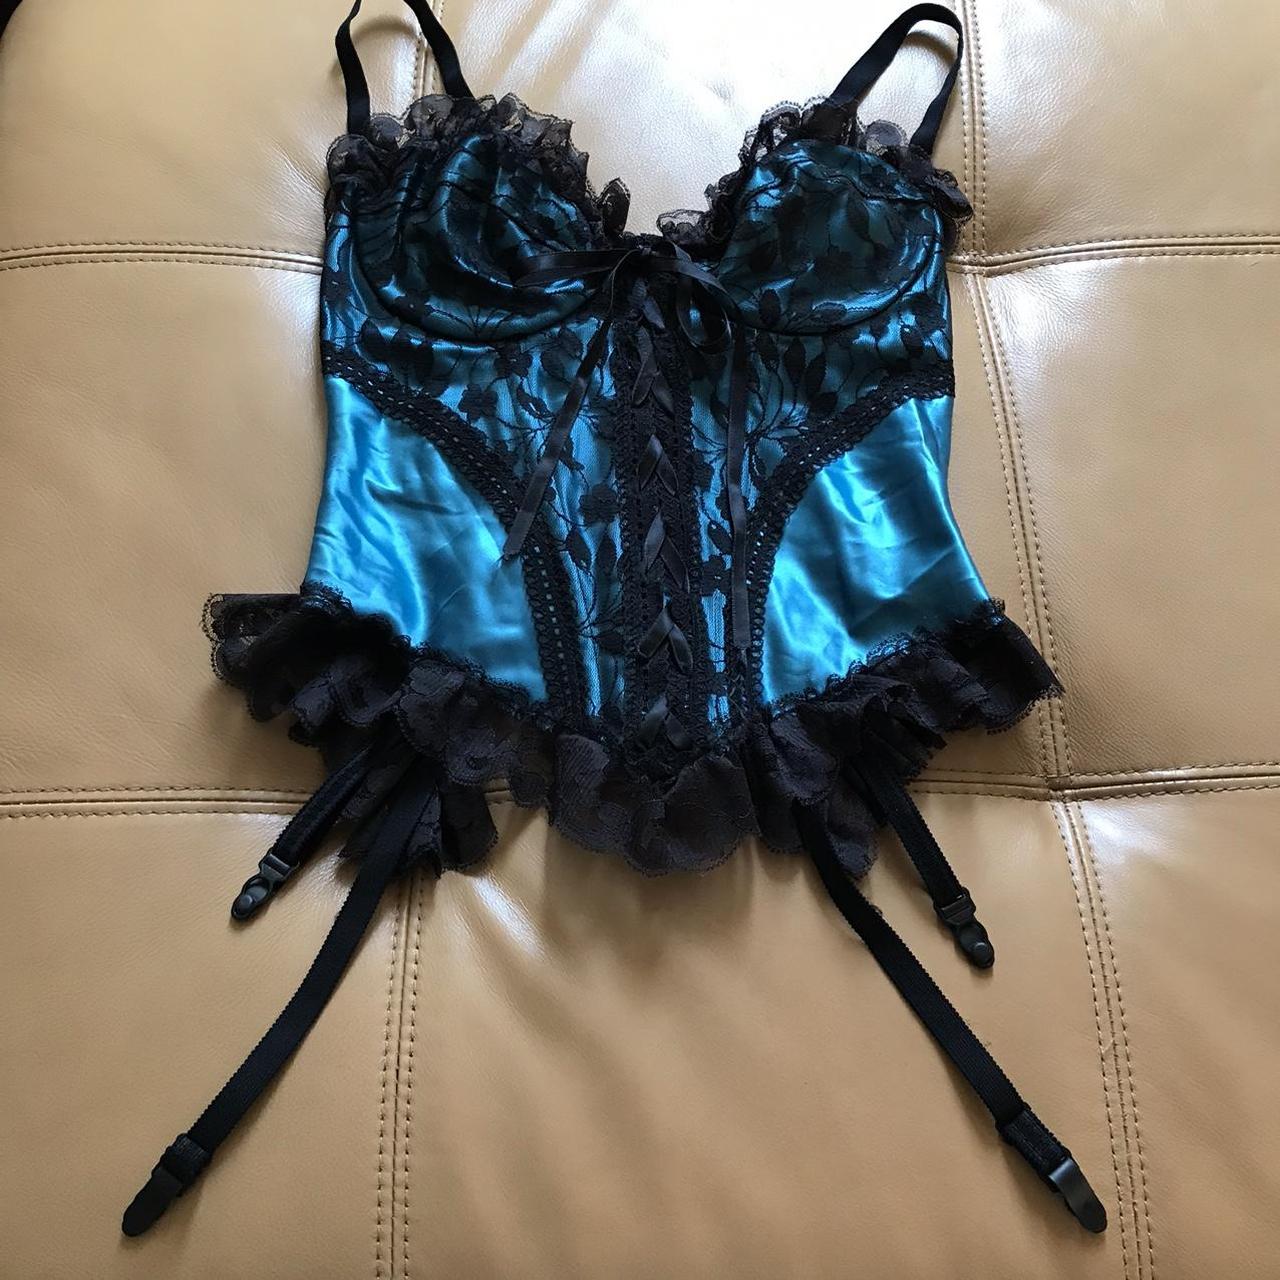 Fredericks of Hollywood corset/bustier satin & lace - Depop